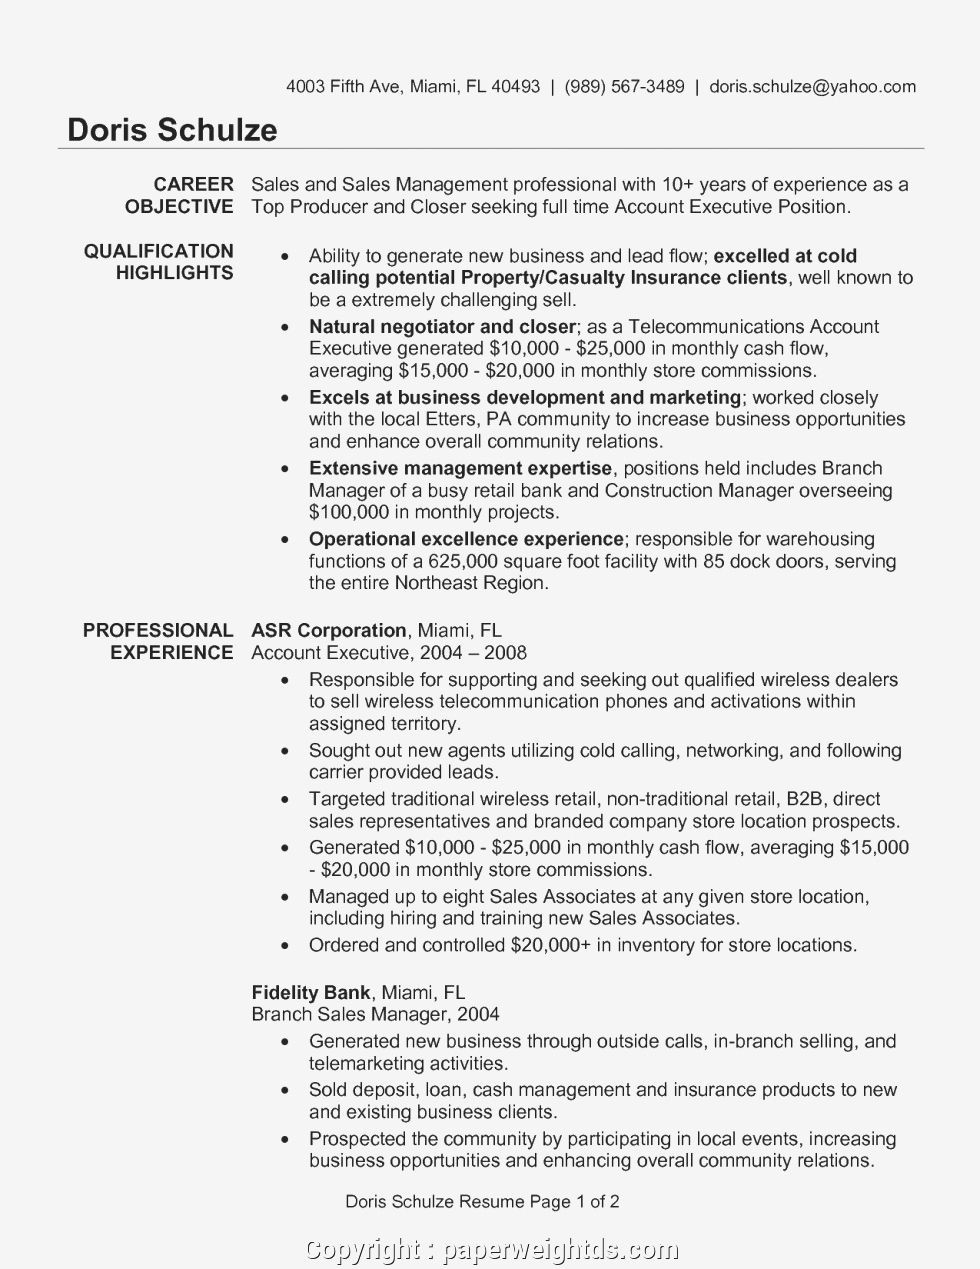 Sample Resume for Retired Bank Manager Account Executive Sample Resume, Account Manager Sample Resume …